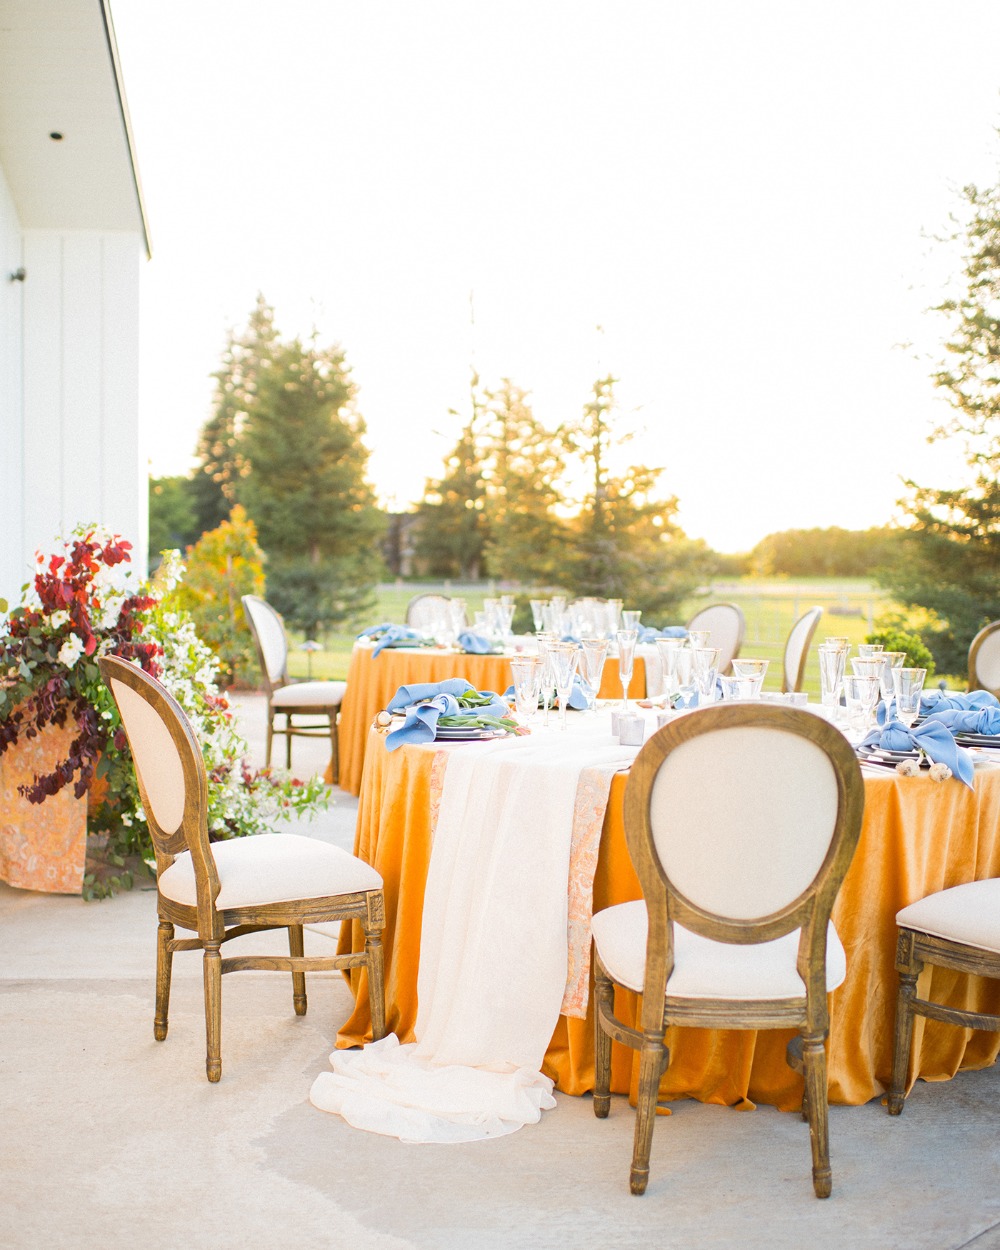 outdoor wedding reception with a chic rustic vibe